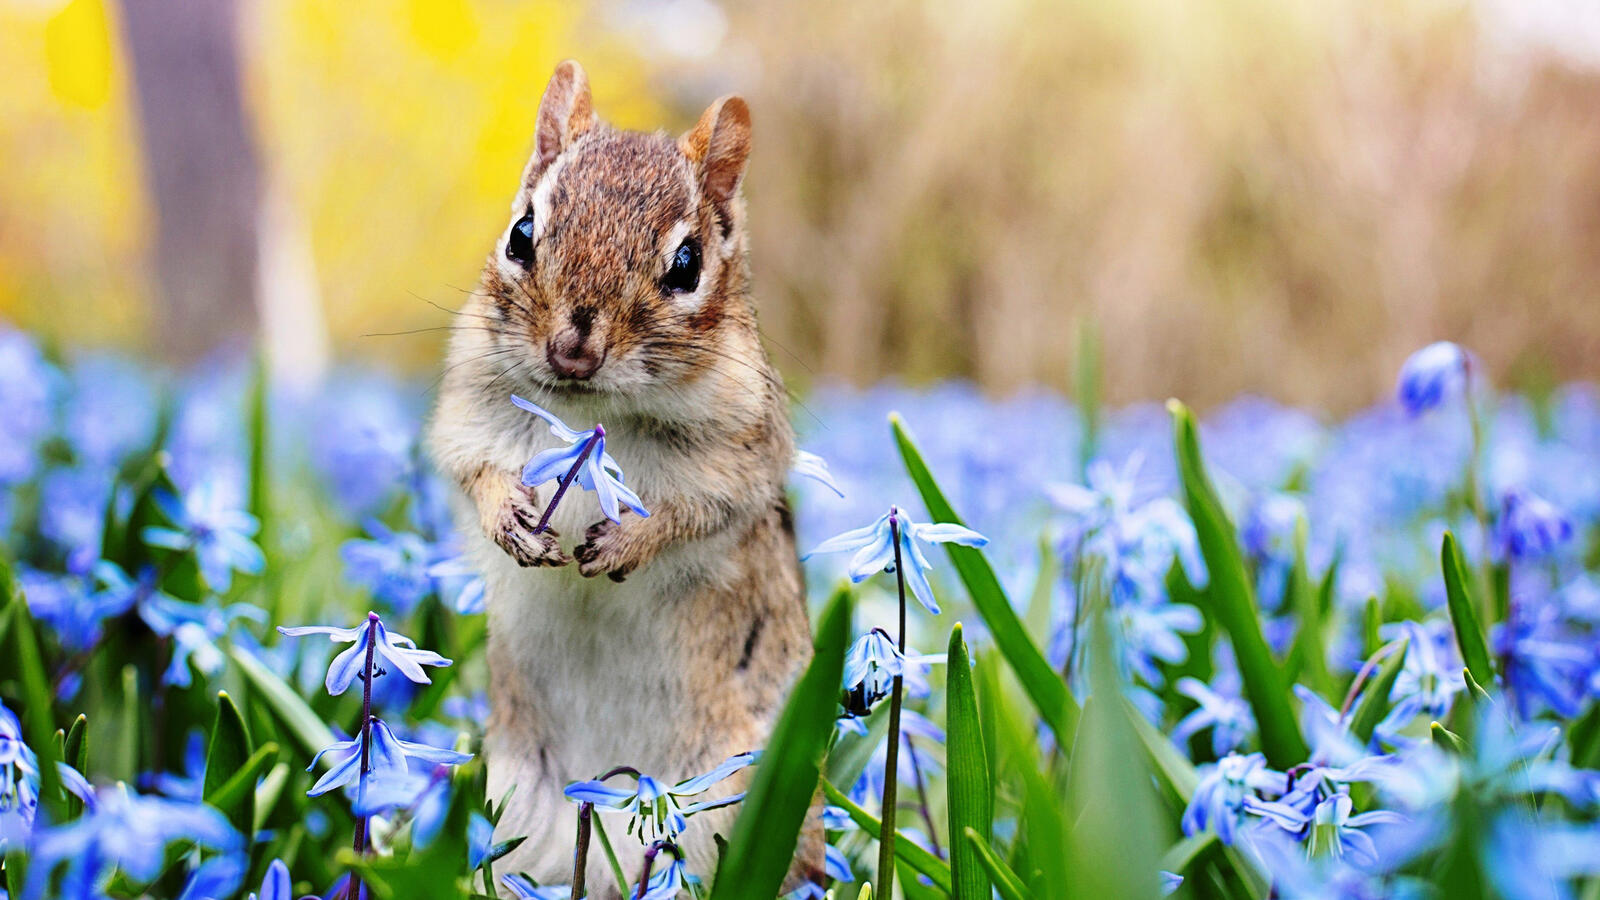 Free photo A little squirrel in a field of blue flowers